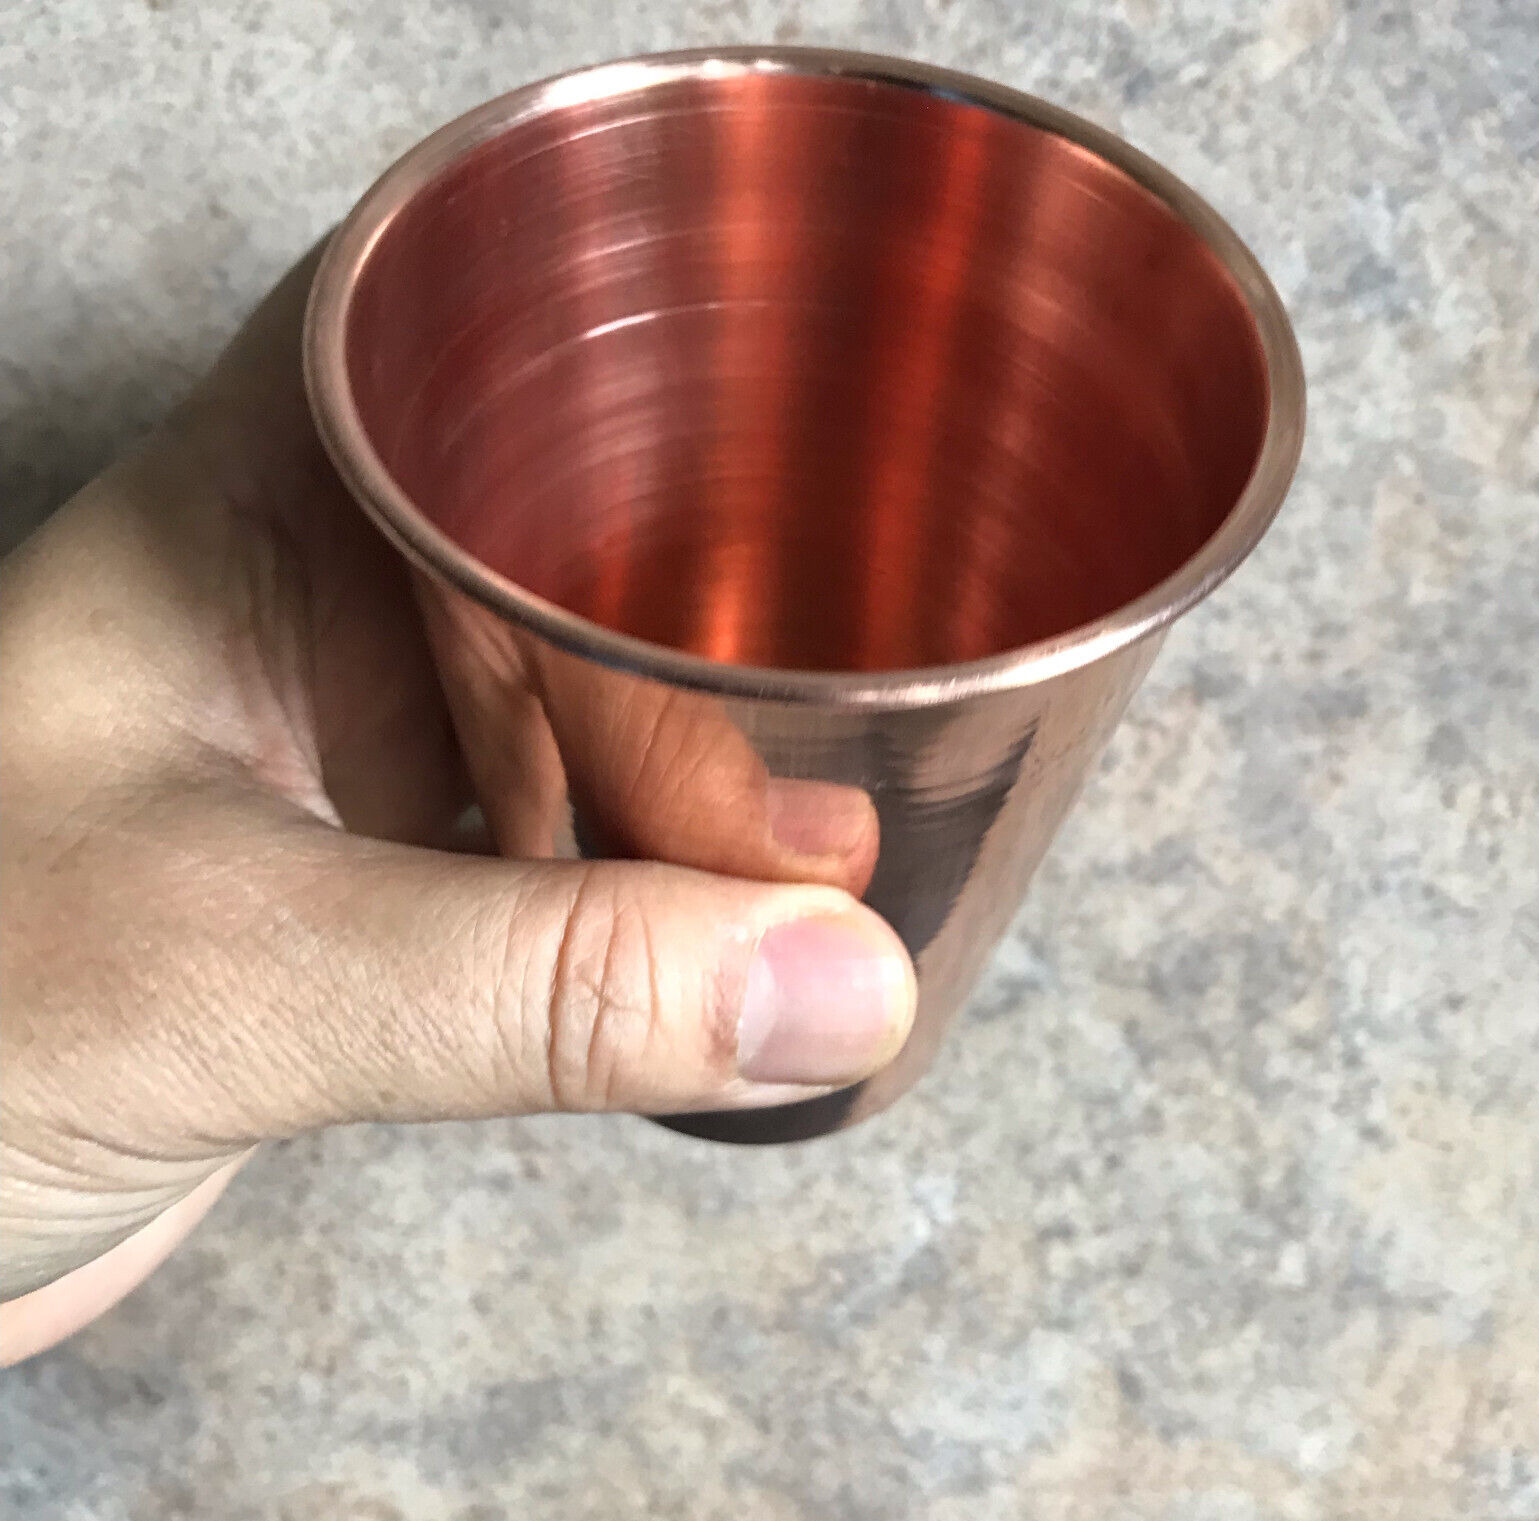 Genuine Copper Water Drink Cup Pure Solid ship from USA to USA only